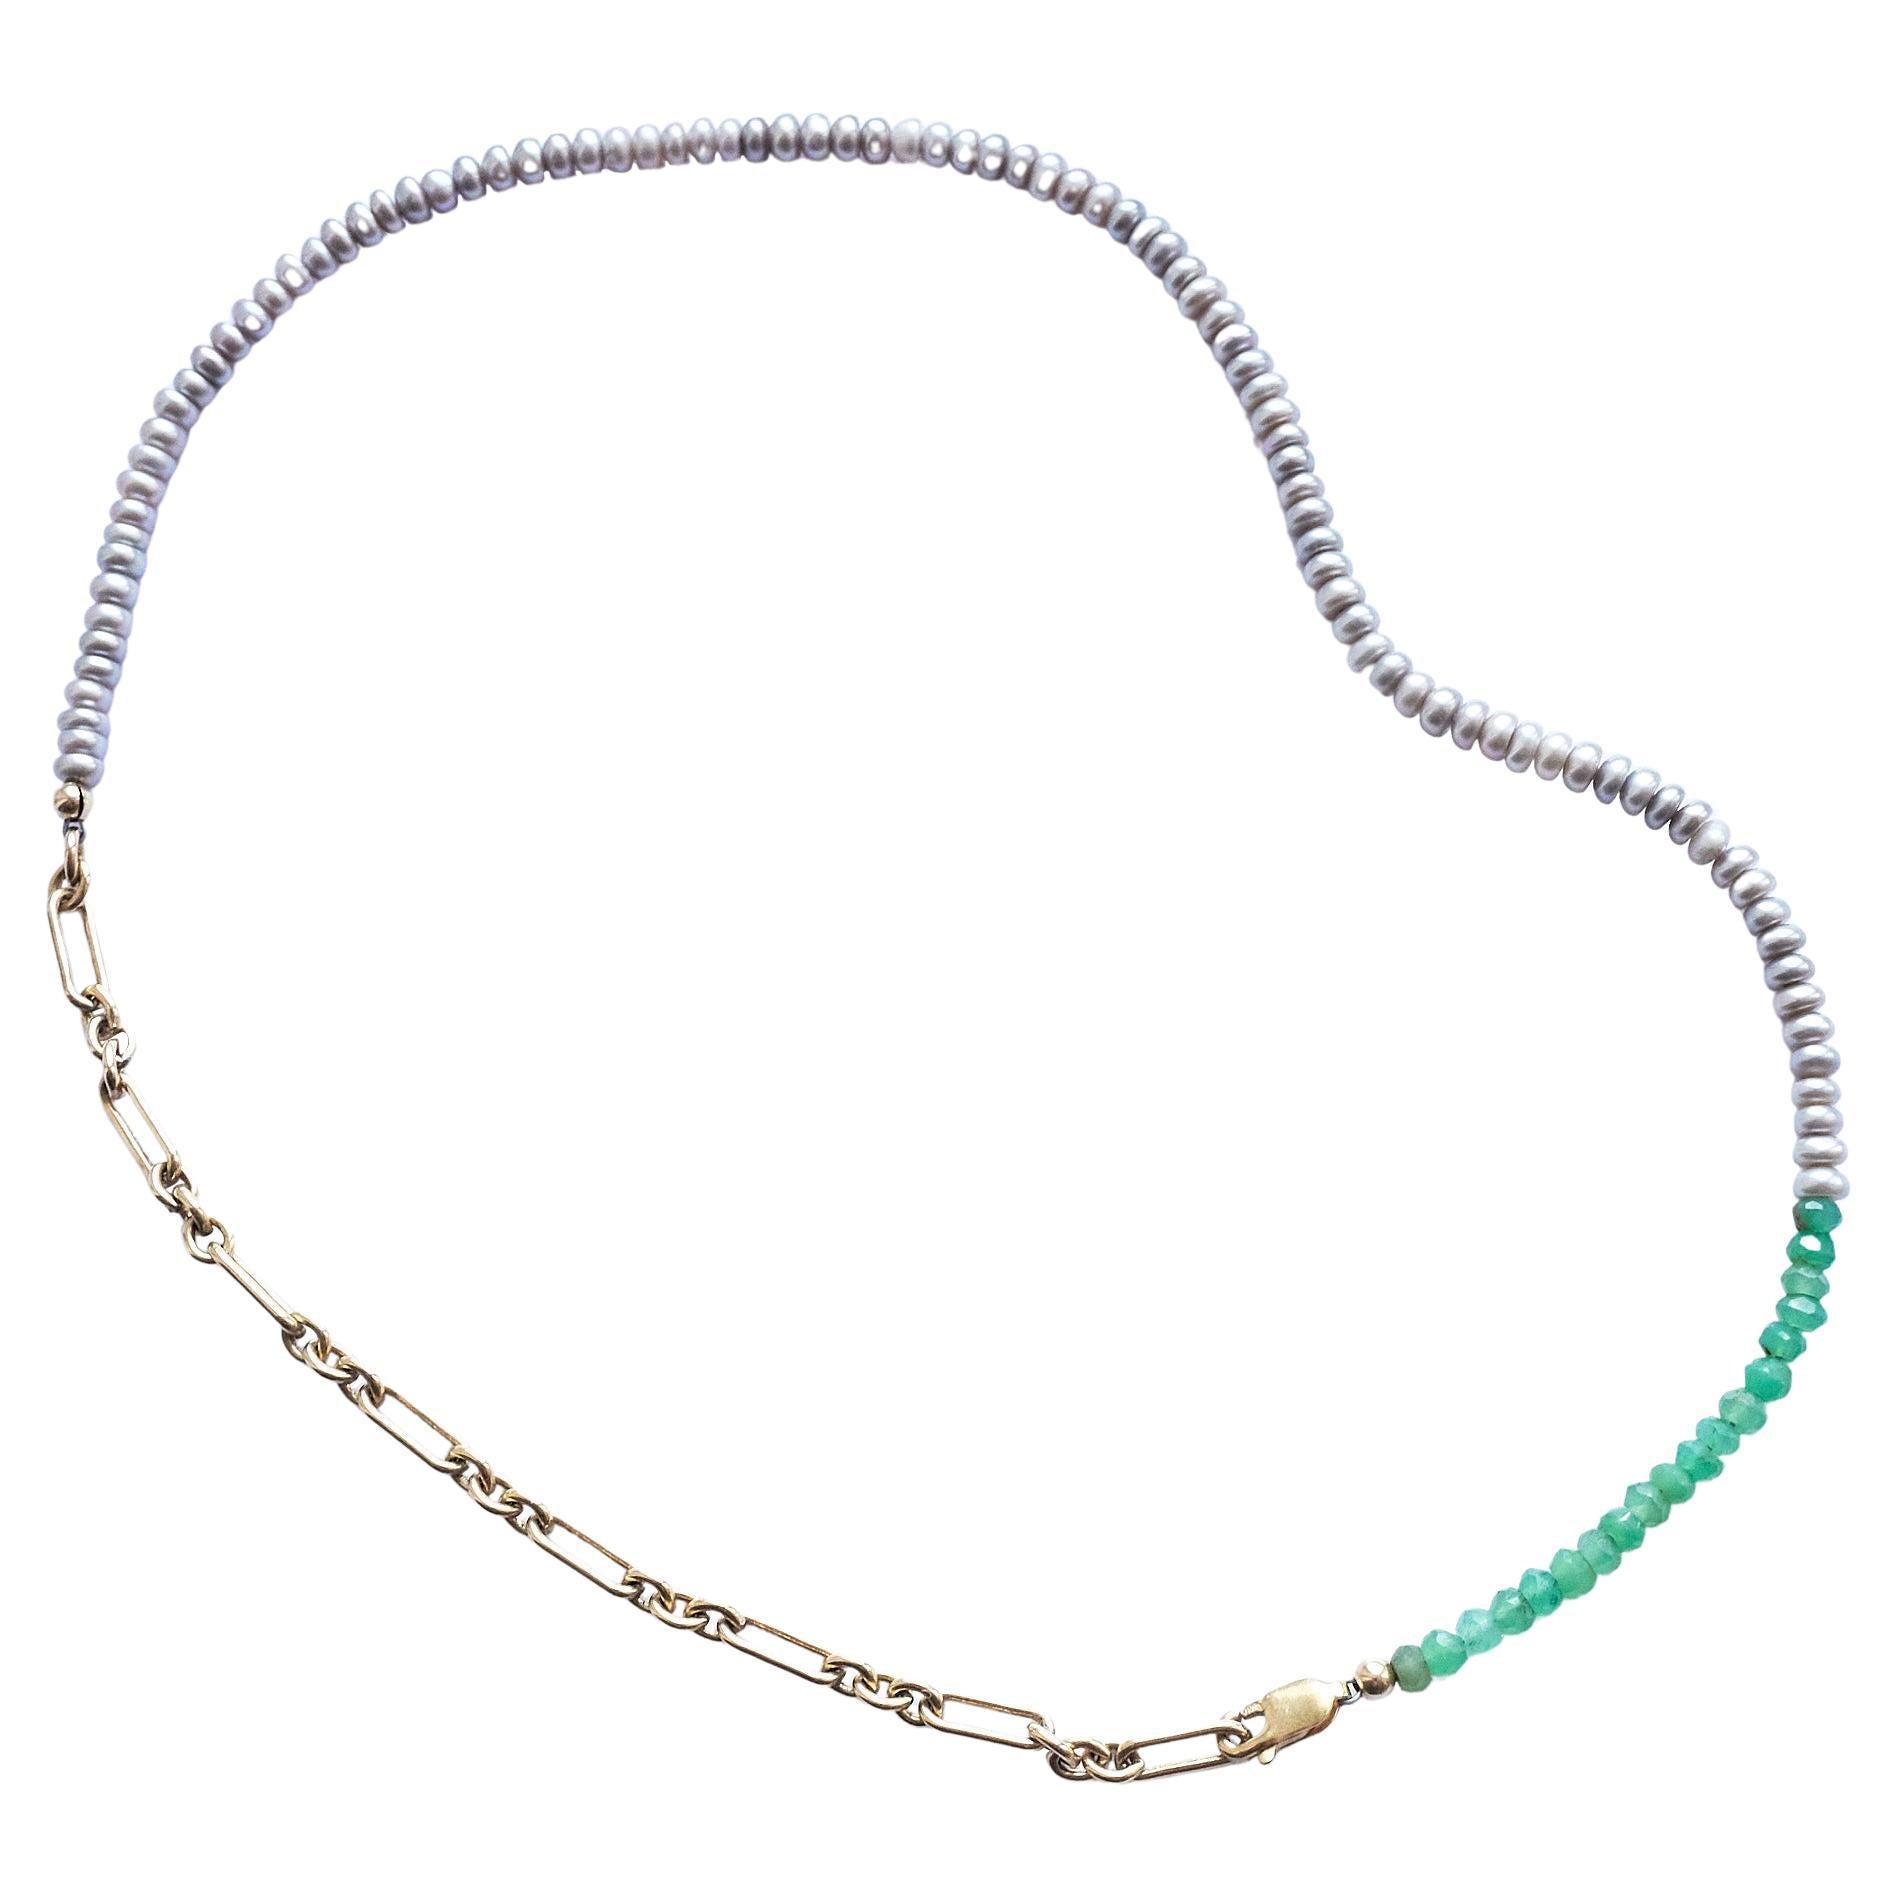 Silver Pearl Chain Necklace Choker Beaded Chrysoprase J Dauphin For Sale